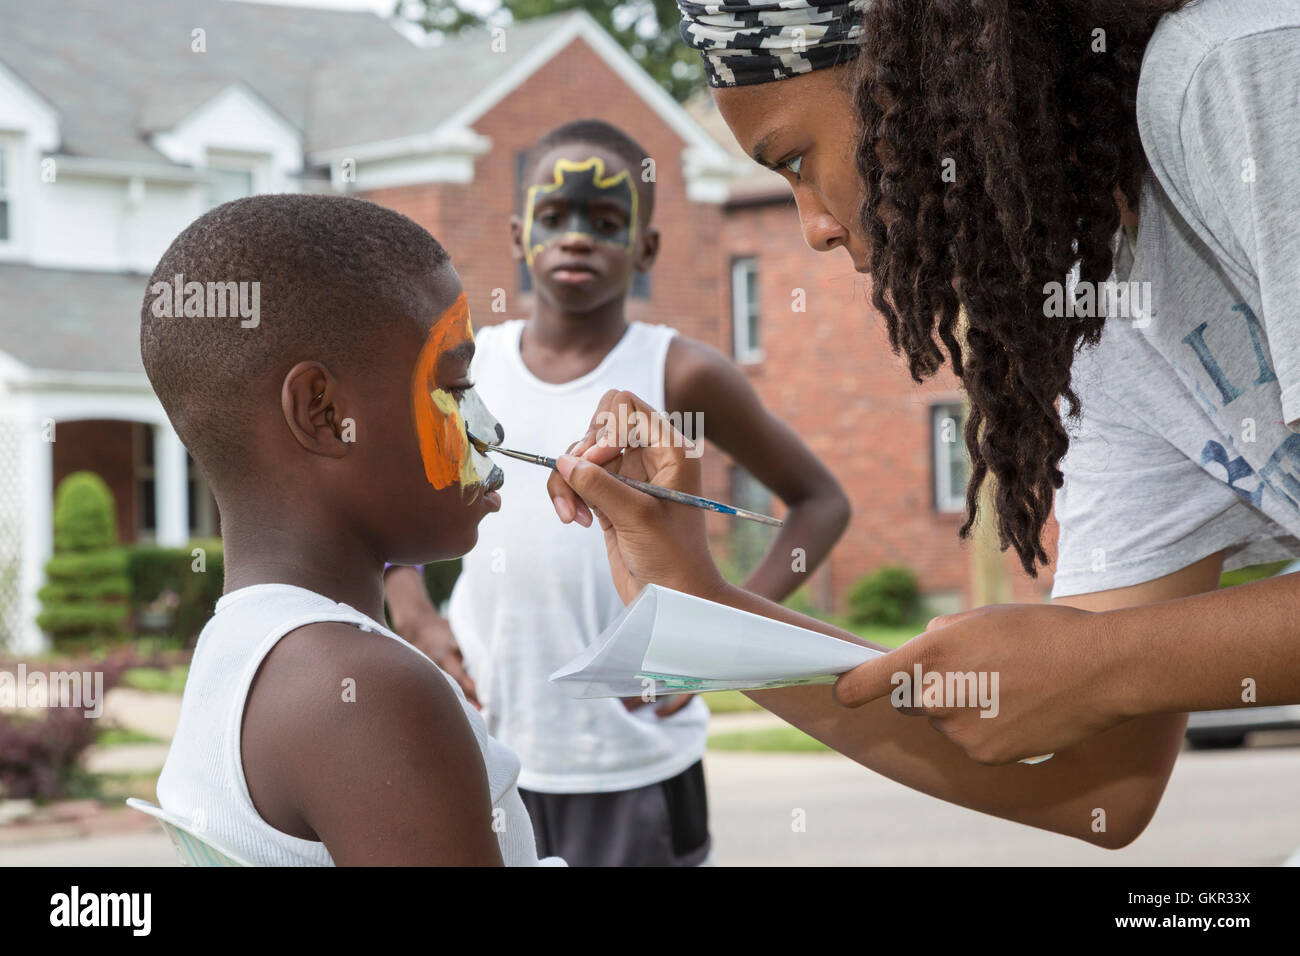 Detroit, Michigan - Face painting during a summer street fair held by a neighborhood group. Stock Photo